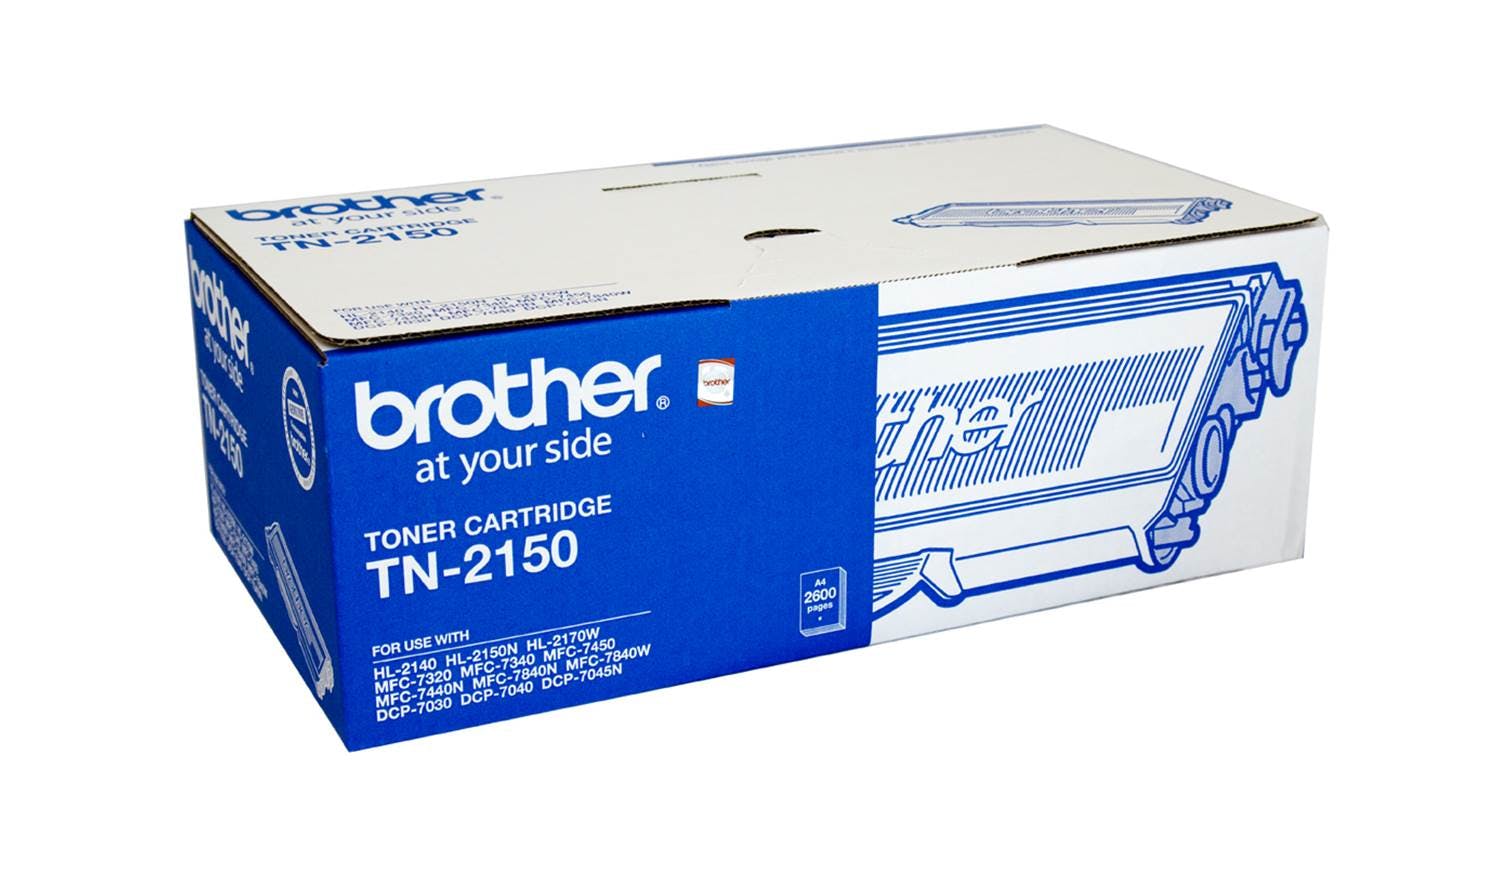 Dowload Brother Printer Driver 7040 : Here is the drivers ...